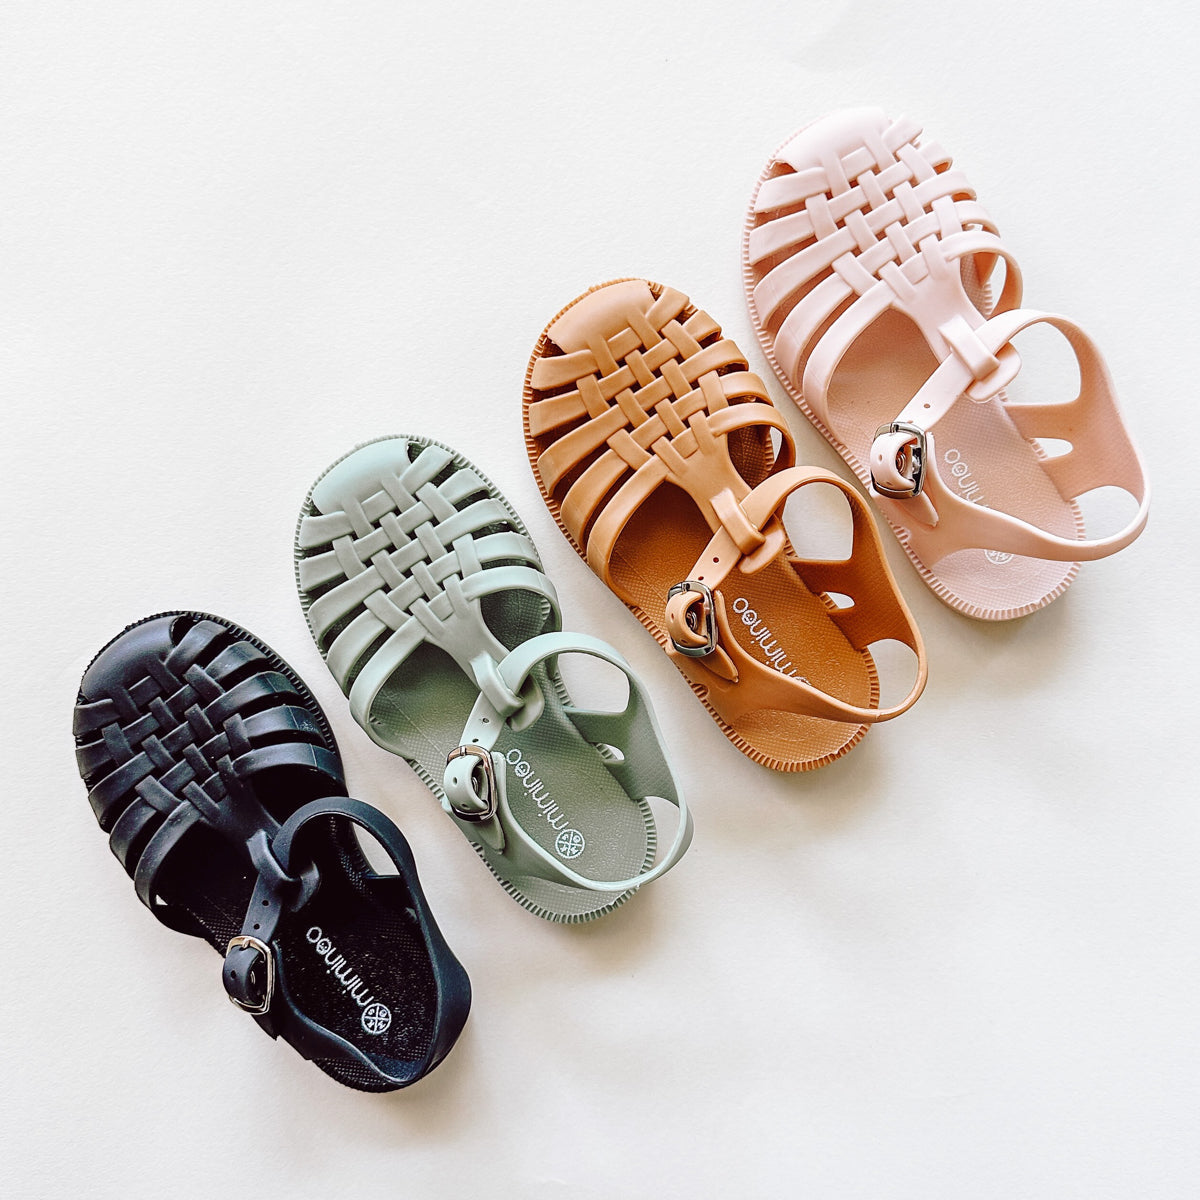 A pair of MKS Miminoo Flexible PVC Summer waterproof Sandals in Sage, terracotta, blush pink and black for boys and girls toddlers and babies